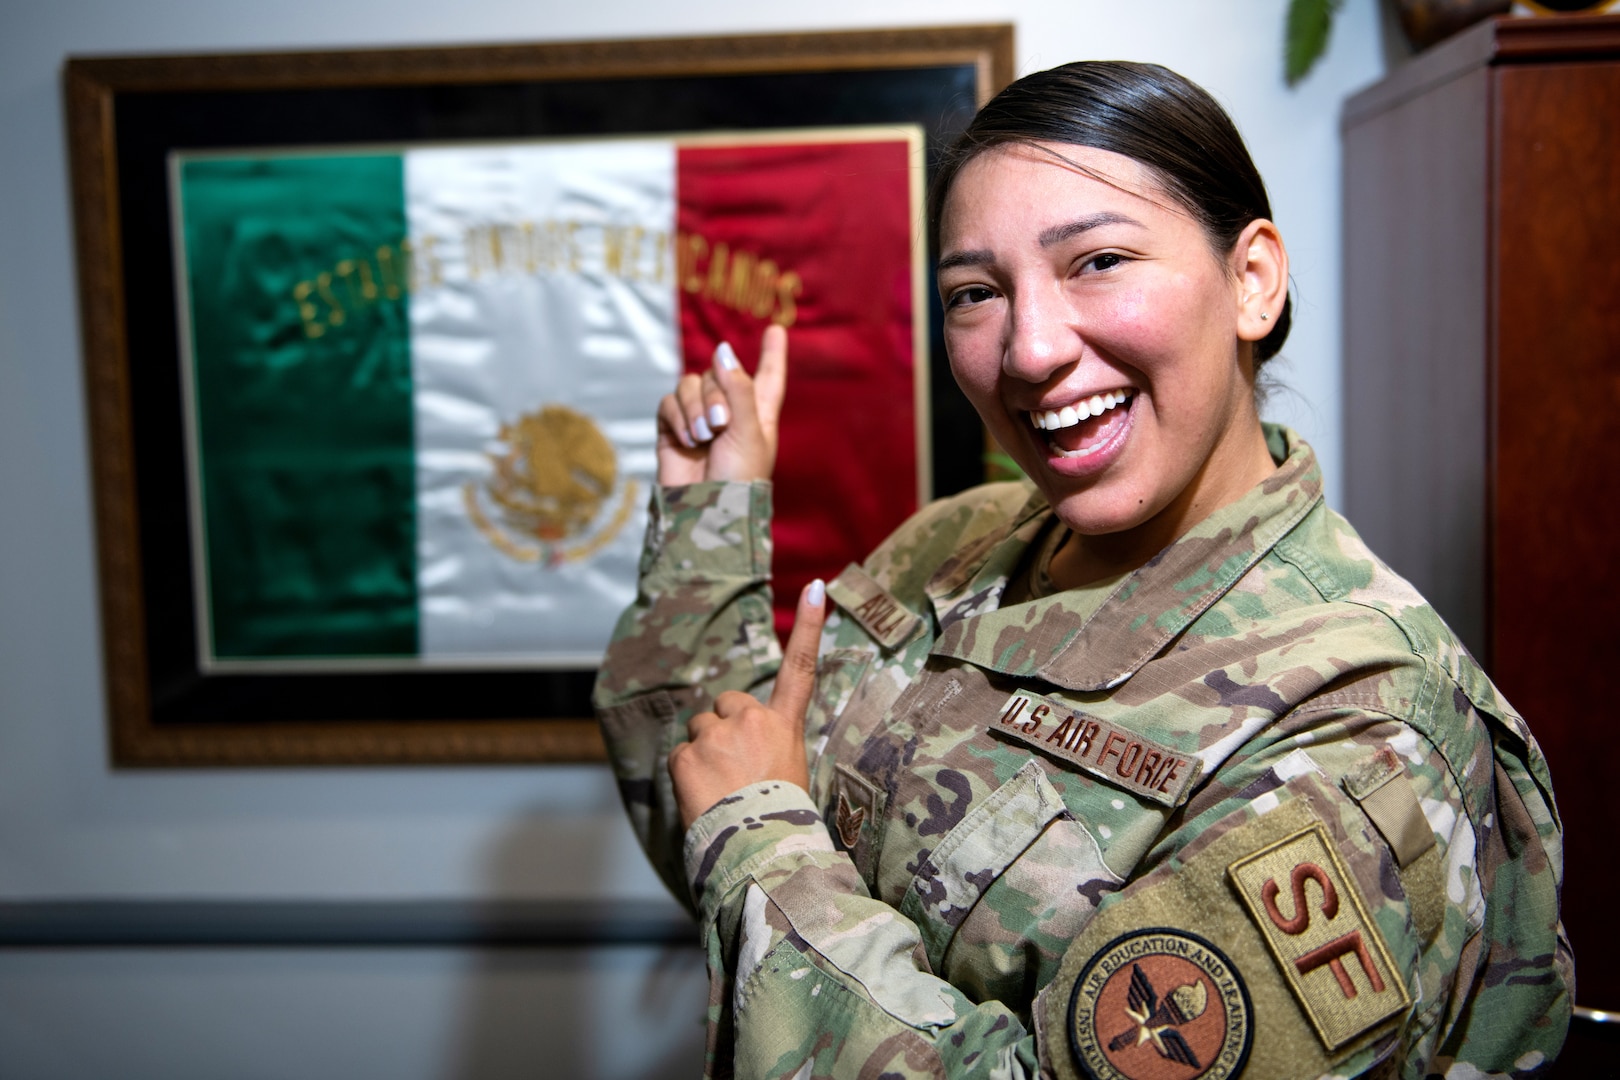 U.S. Air Force Tech. Sgt. Alejandra Avila, Inter-American Air Forces Academy executive officer for the commandant, poses for a photograph in support of Hispanic Heritage Month Sept. 18, 2020, at Joint Base San Antonio-Lackland, Texas.